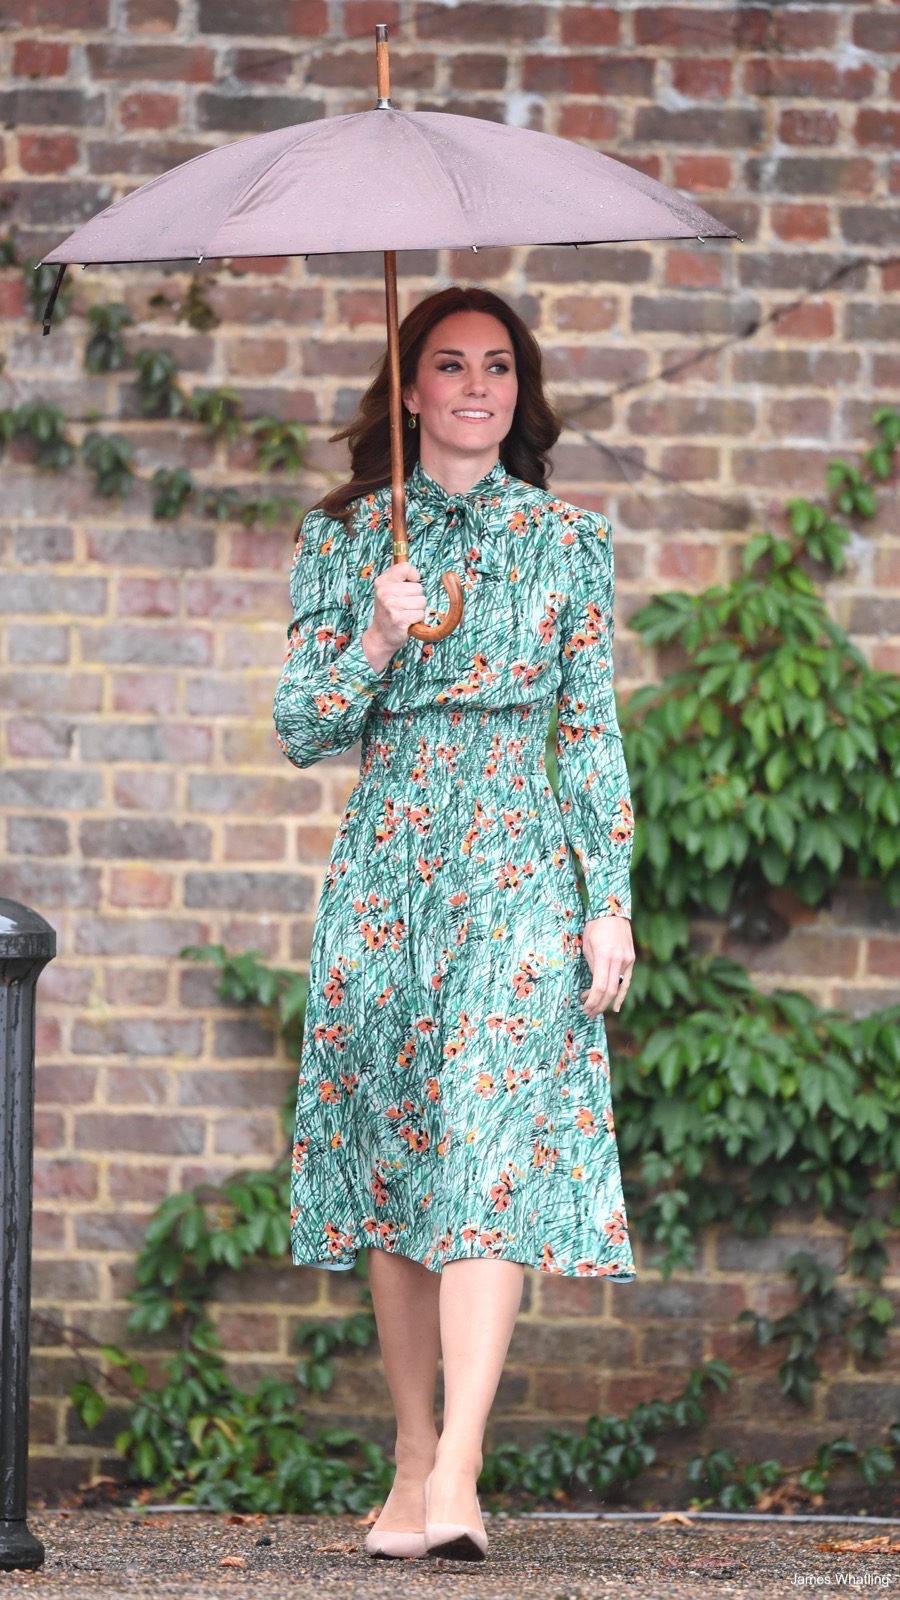 Kate Middleton wearing a Prada dress and L.K. Bennett shoes during a visit to the White Garden